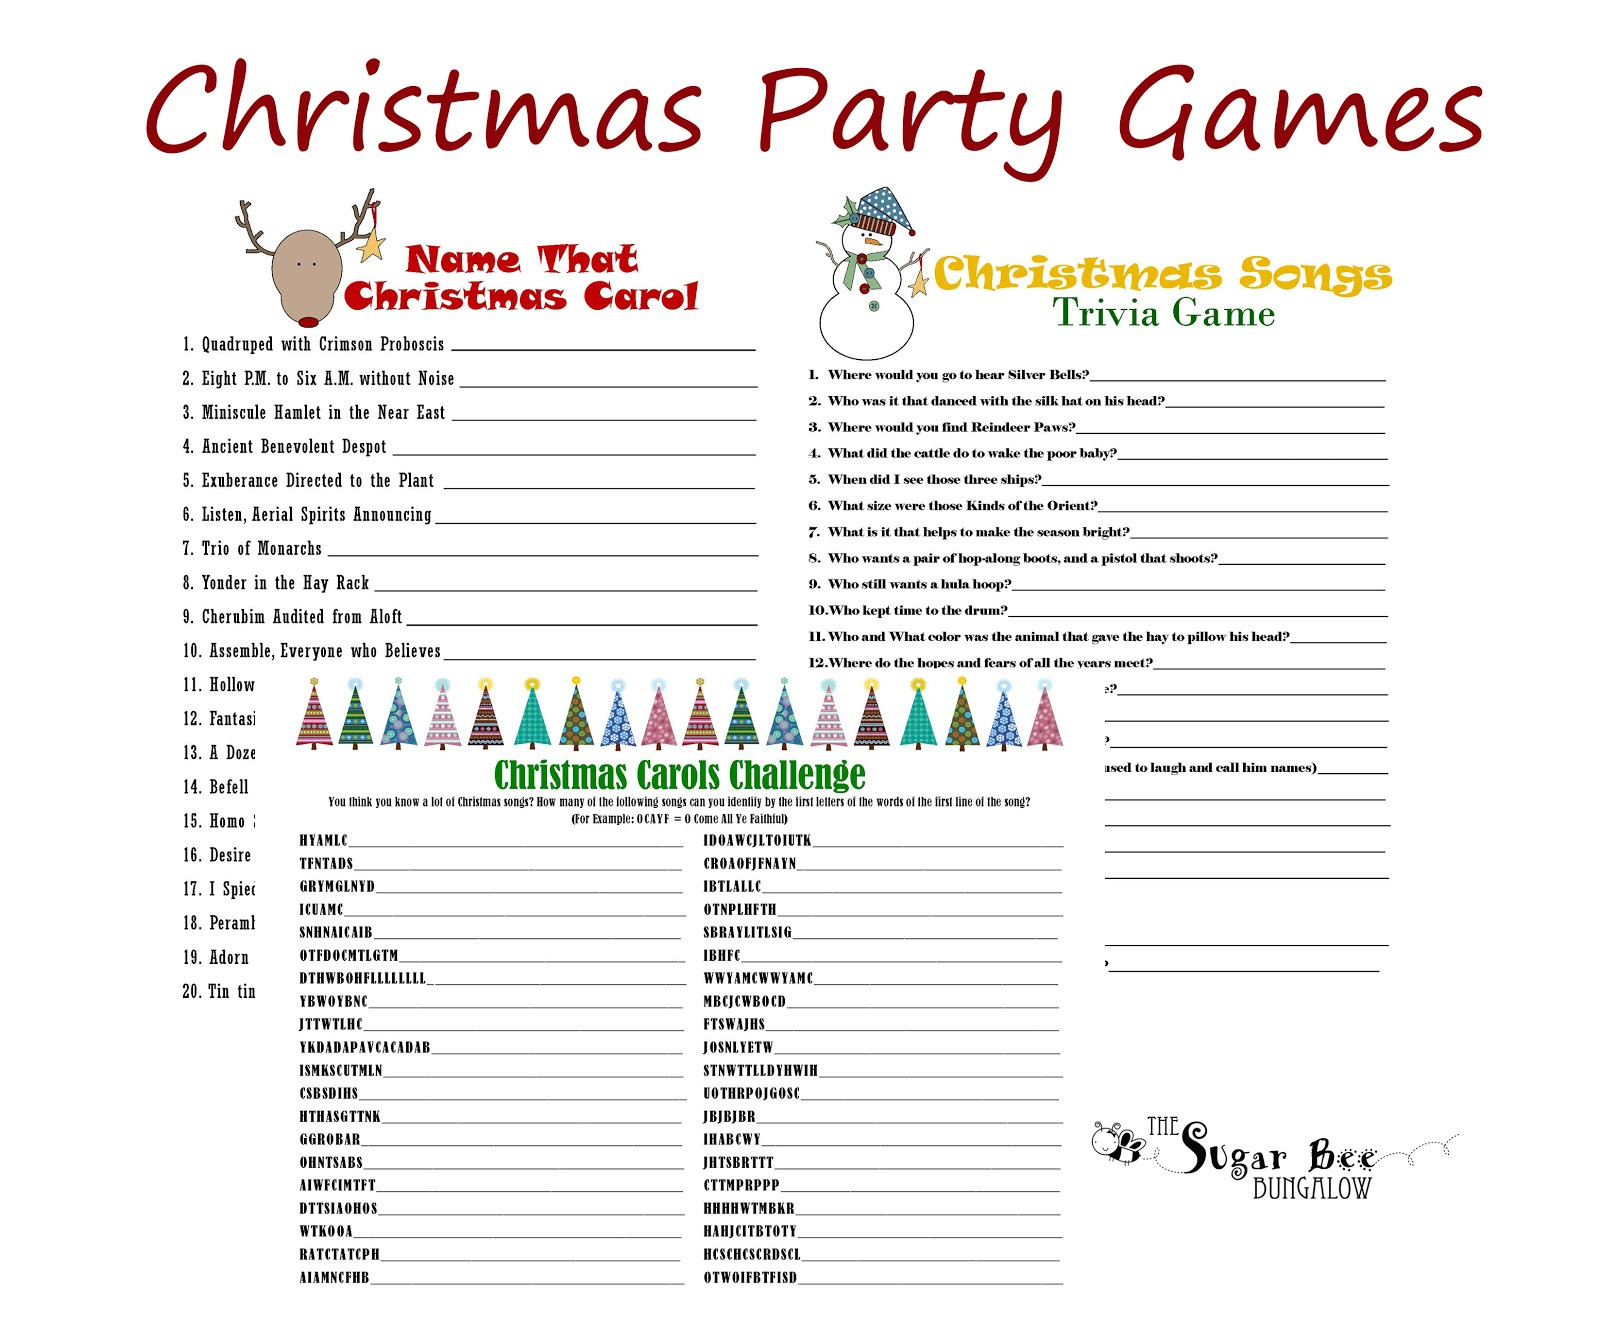 Christmas Party Game Ideas For Work
 The Sugar Bee Bungalow December 2012